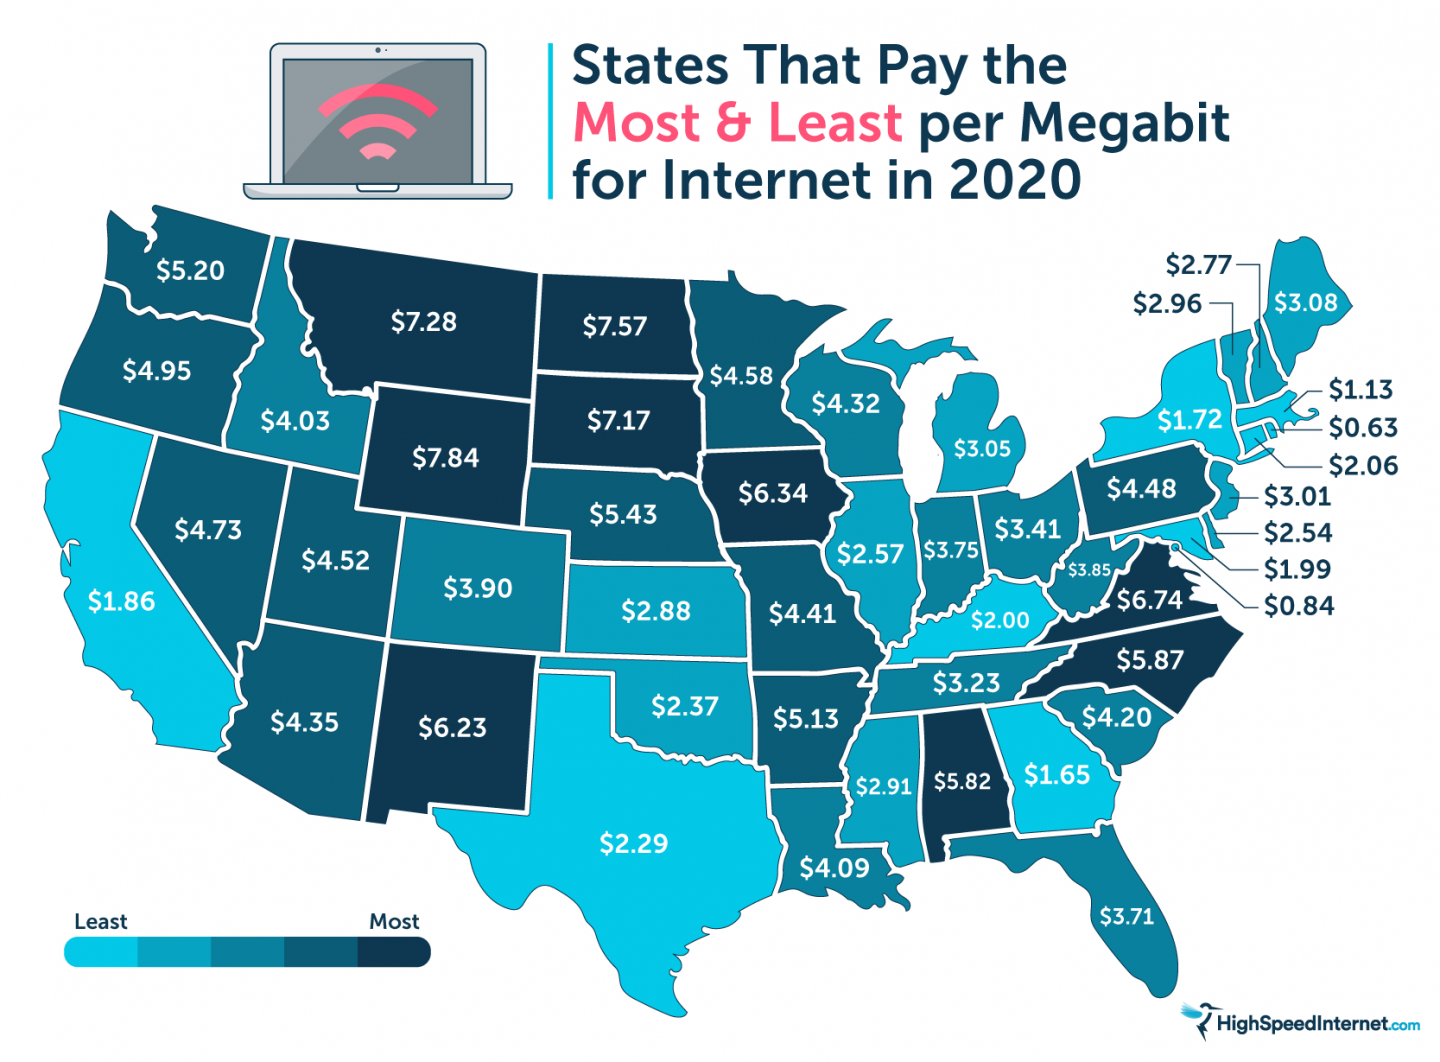 Pay state. Интернет в США. Выход США В интернет. Us_pay. The Price of Internet in the USA.